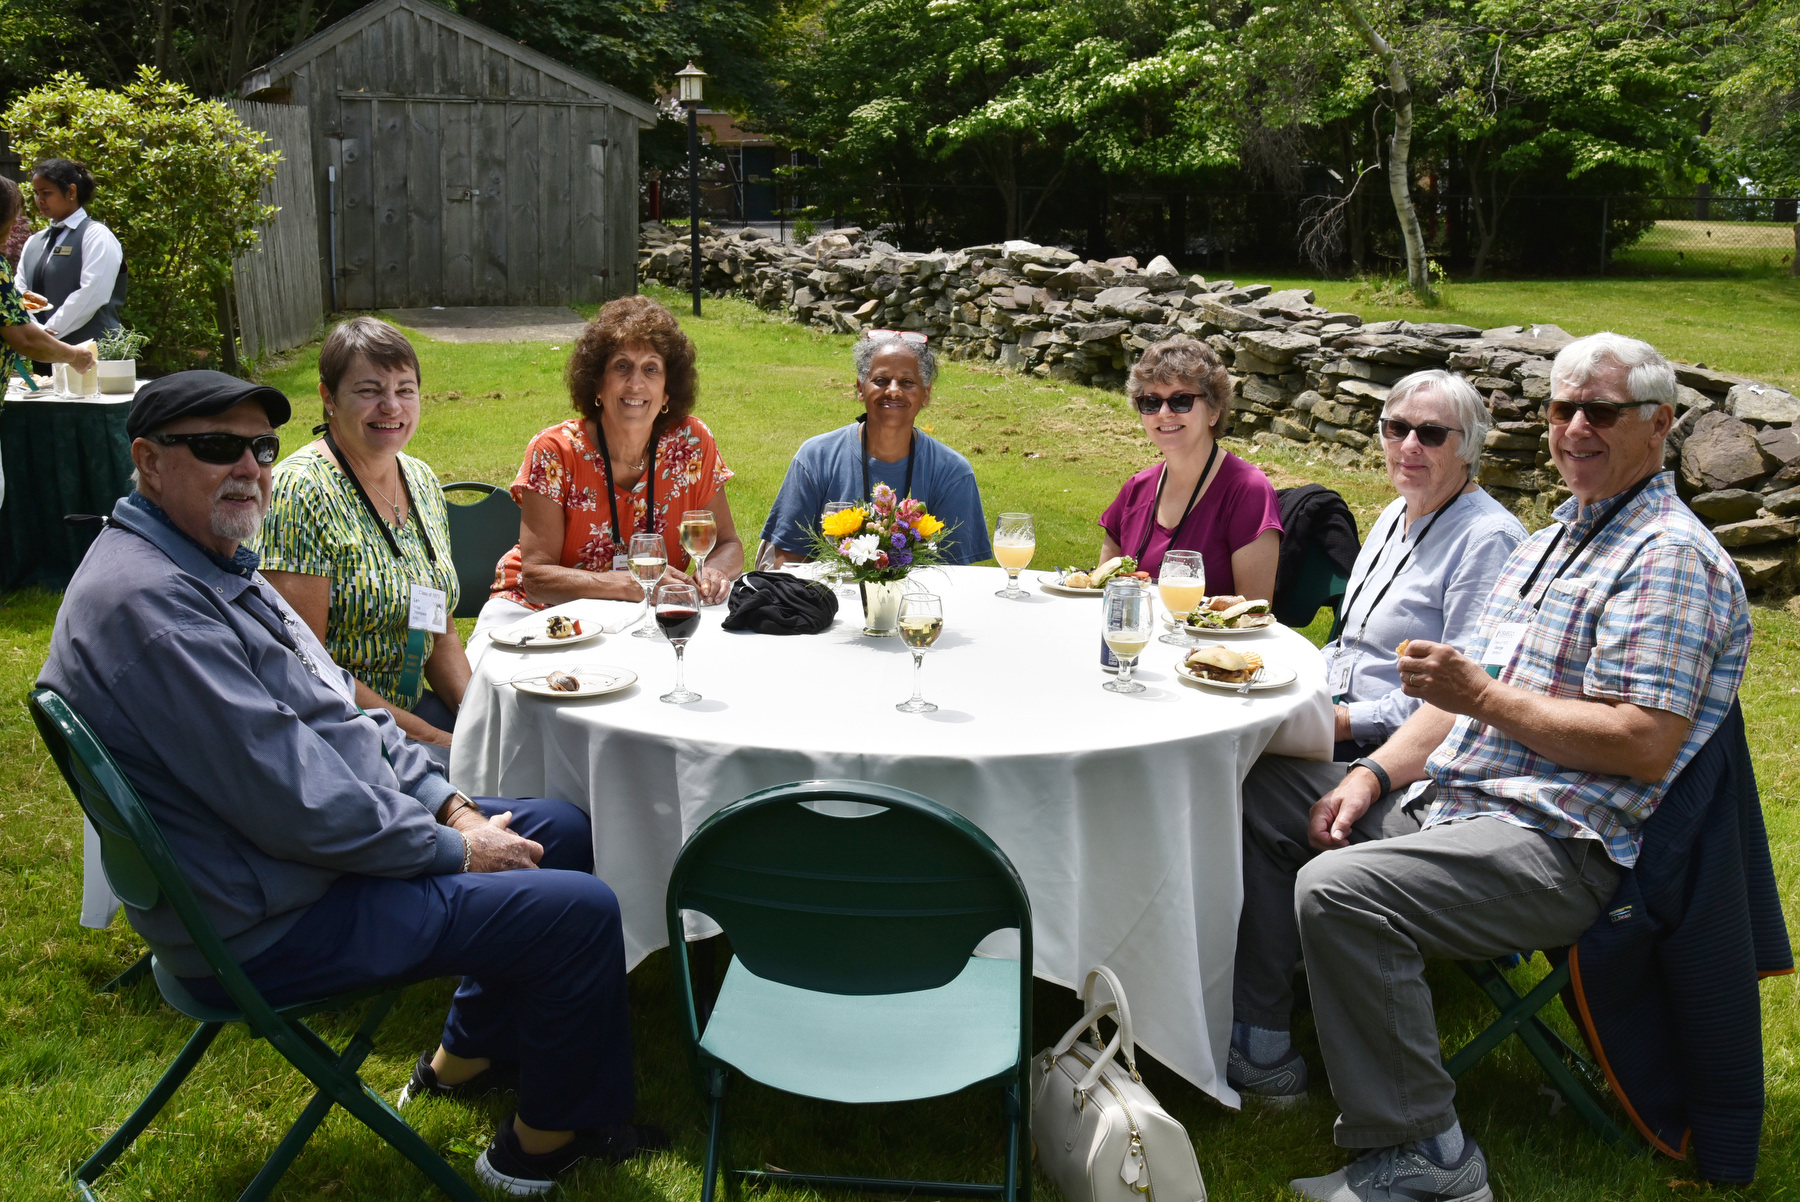 The Remembrance Ceremony at Shady Shore during the class of 1973 reception allowed alumni to reconnect and share memories of those no longer able to make reunions.